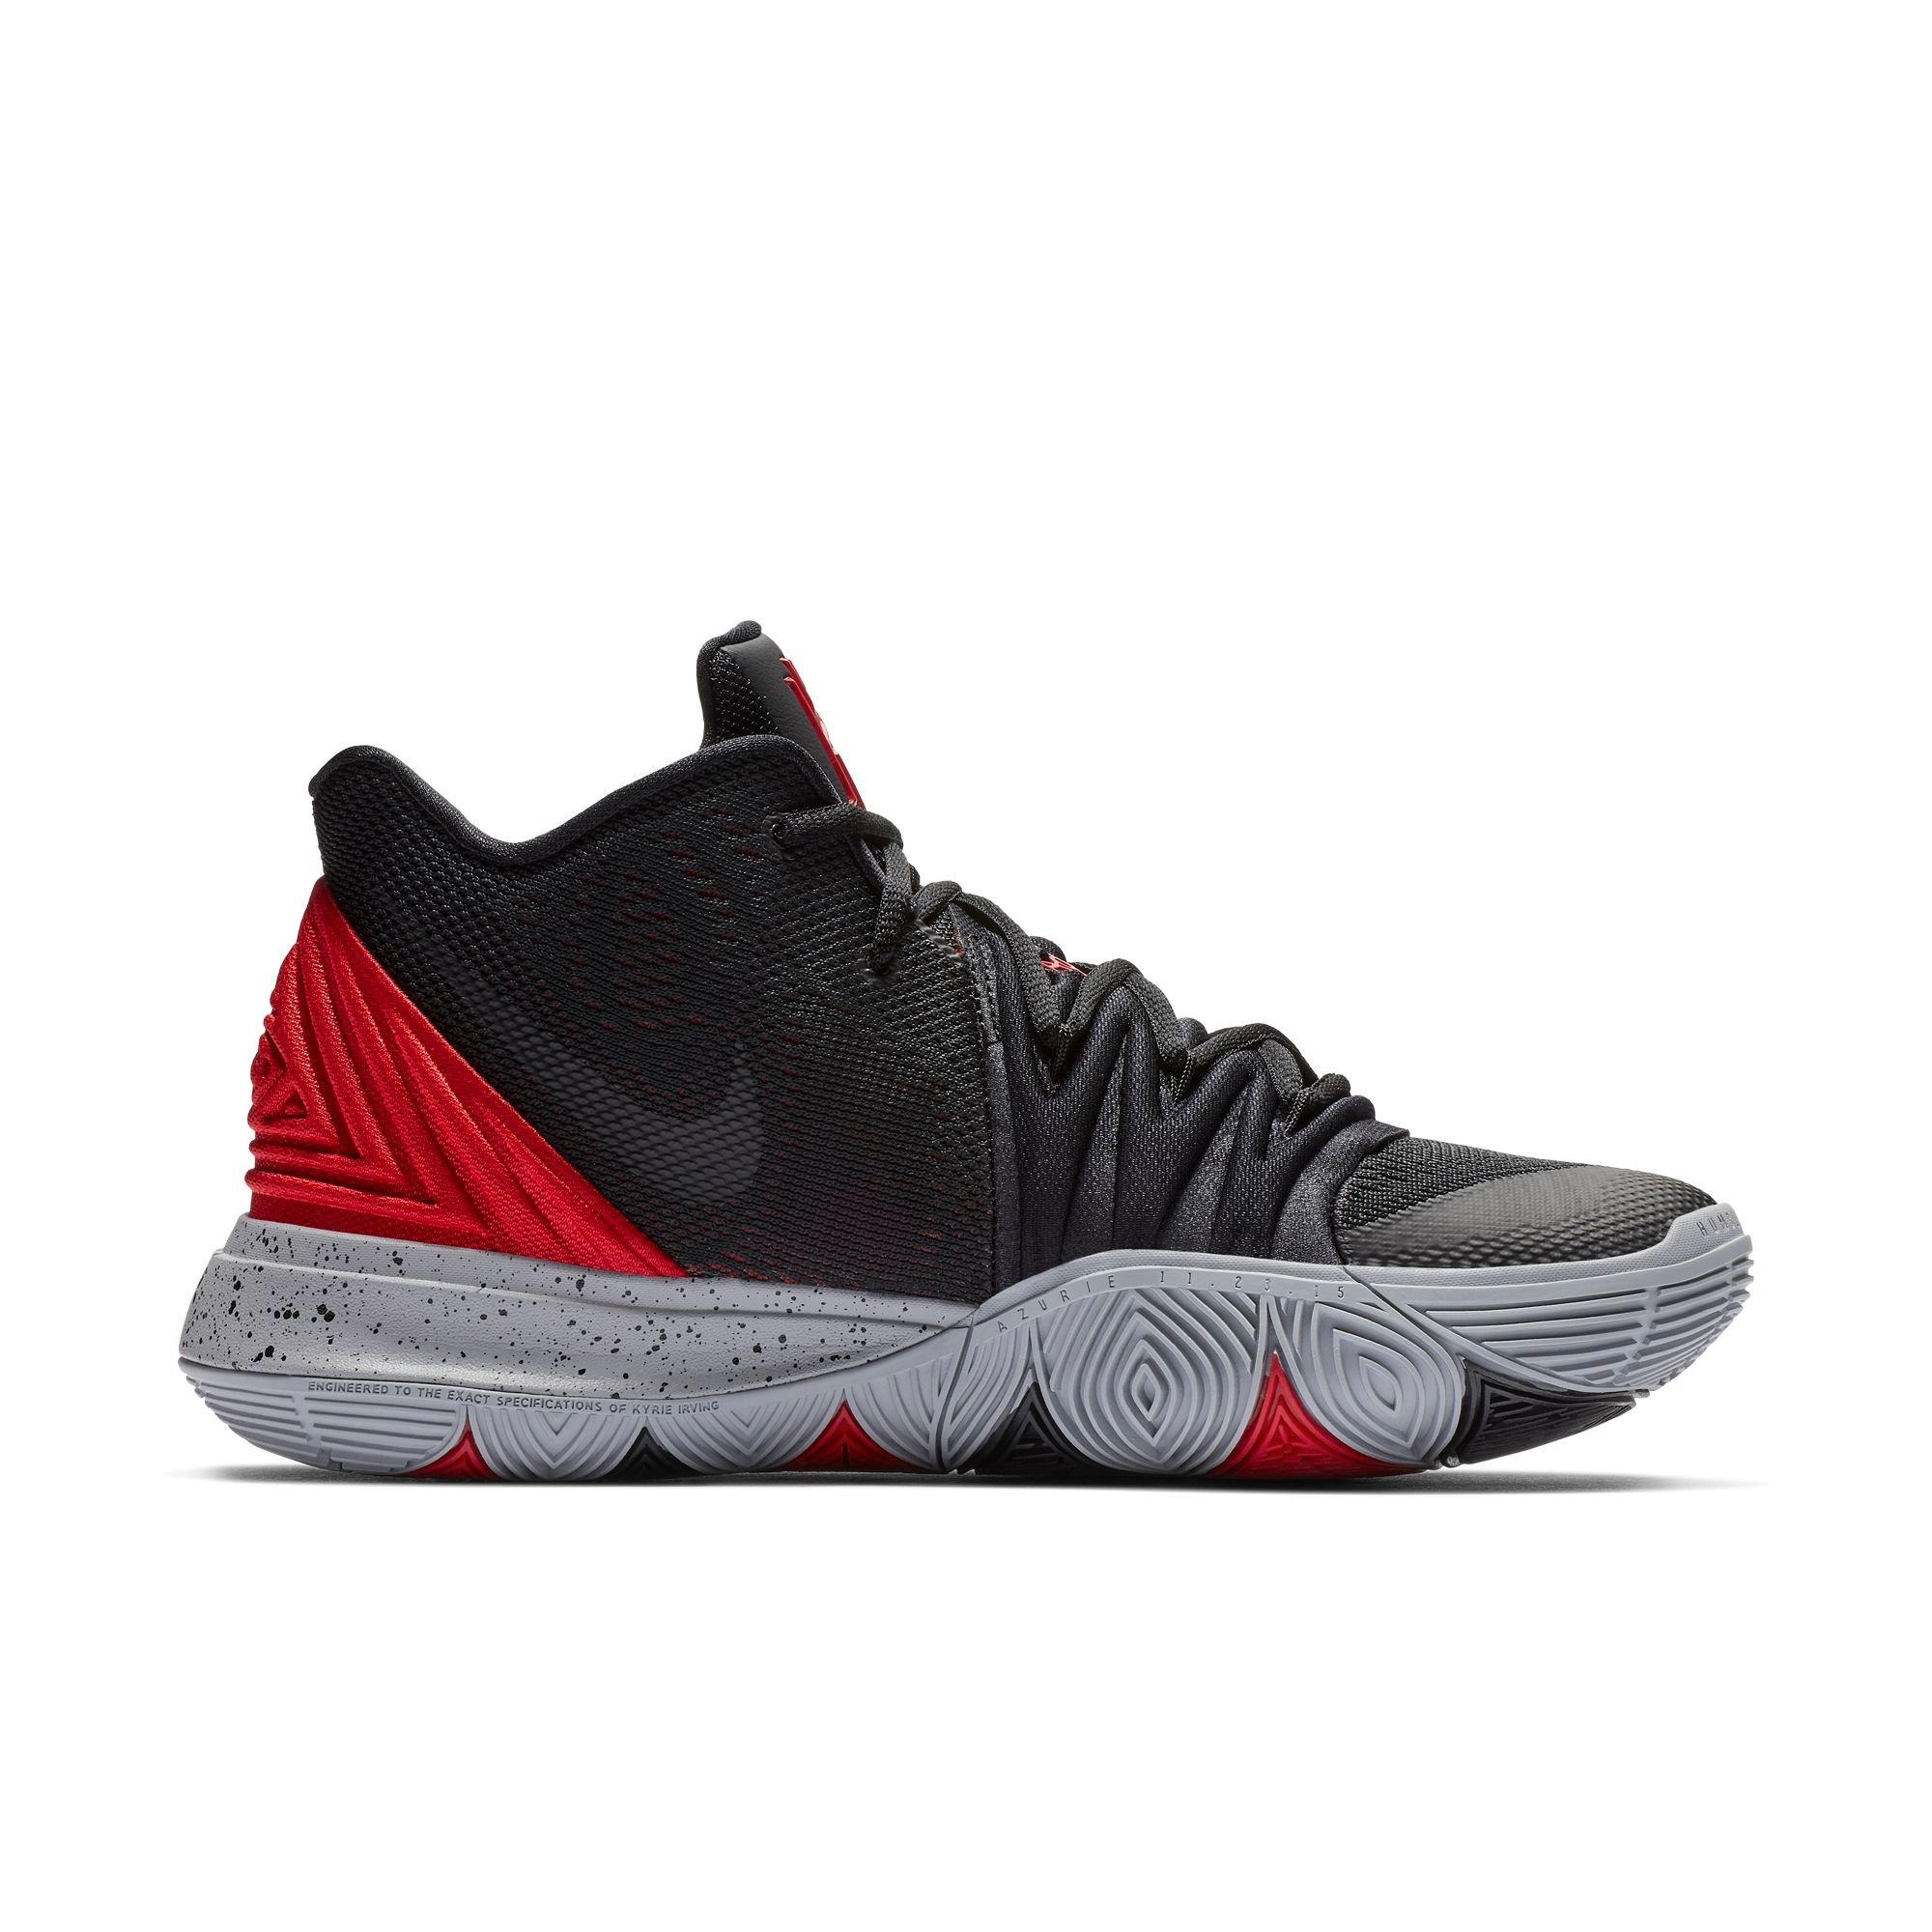 Nike Kyrie 5 University Red Nike ACG Boots On Sale